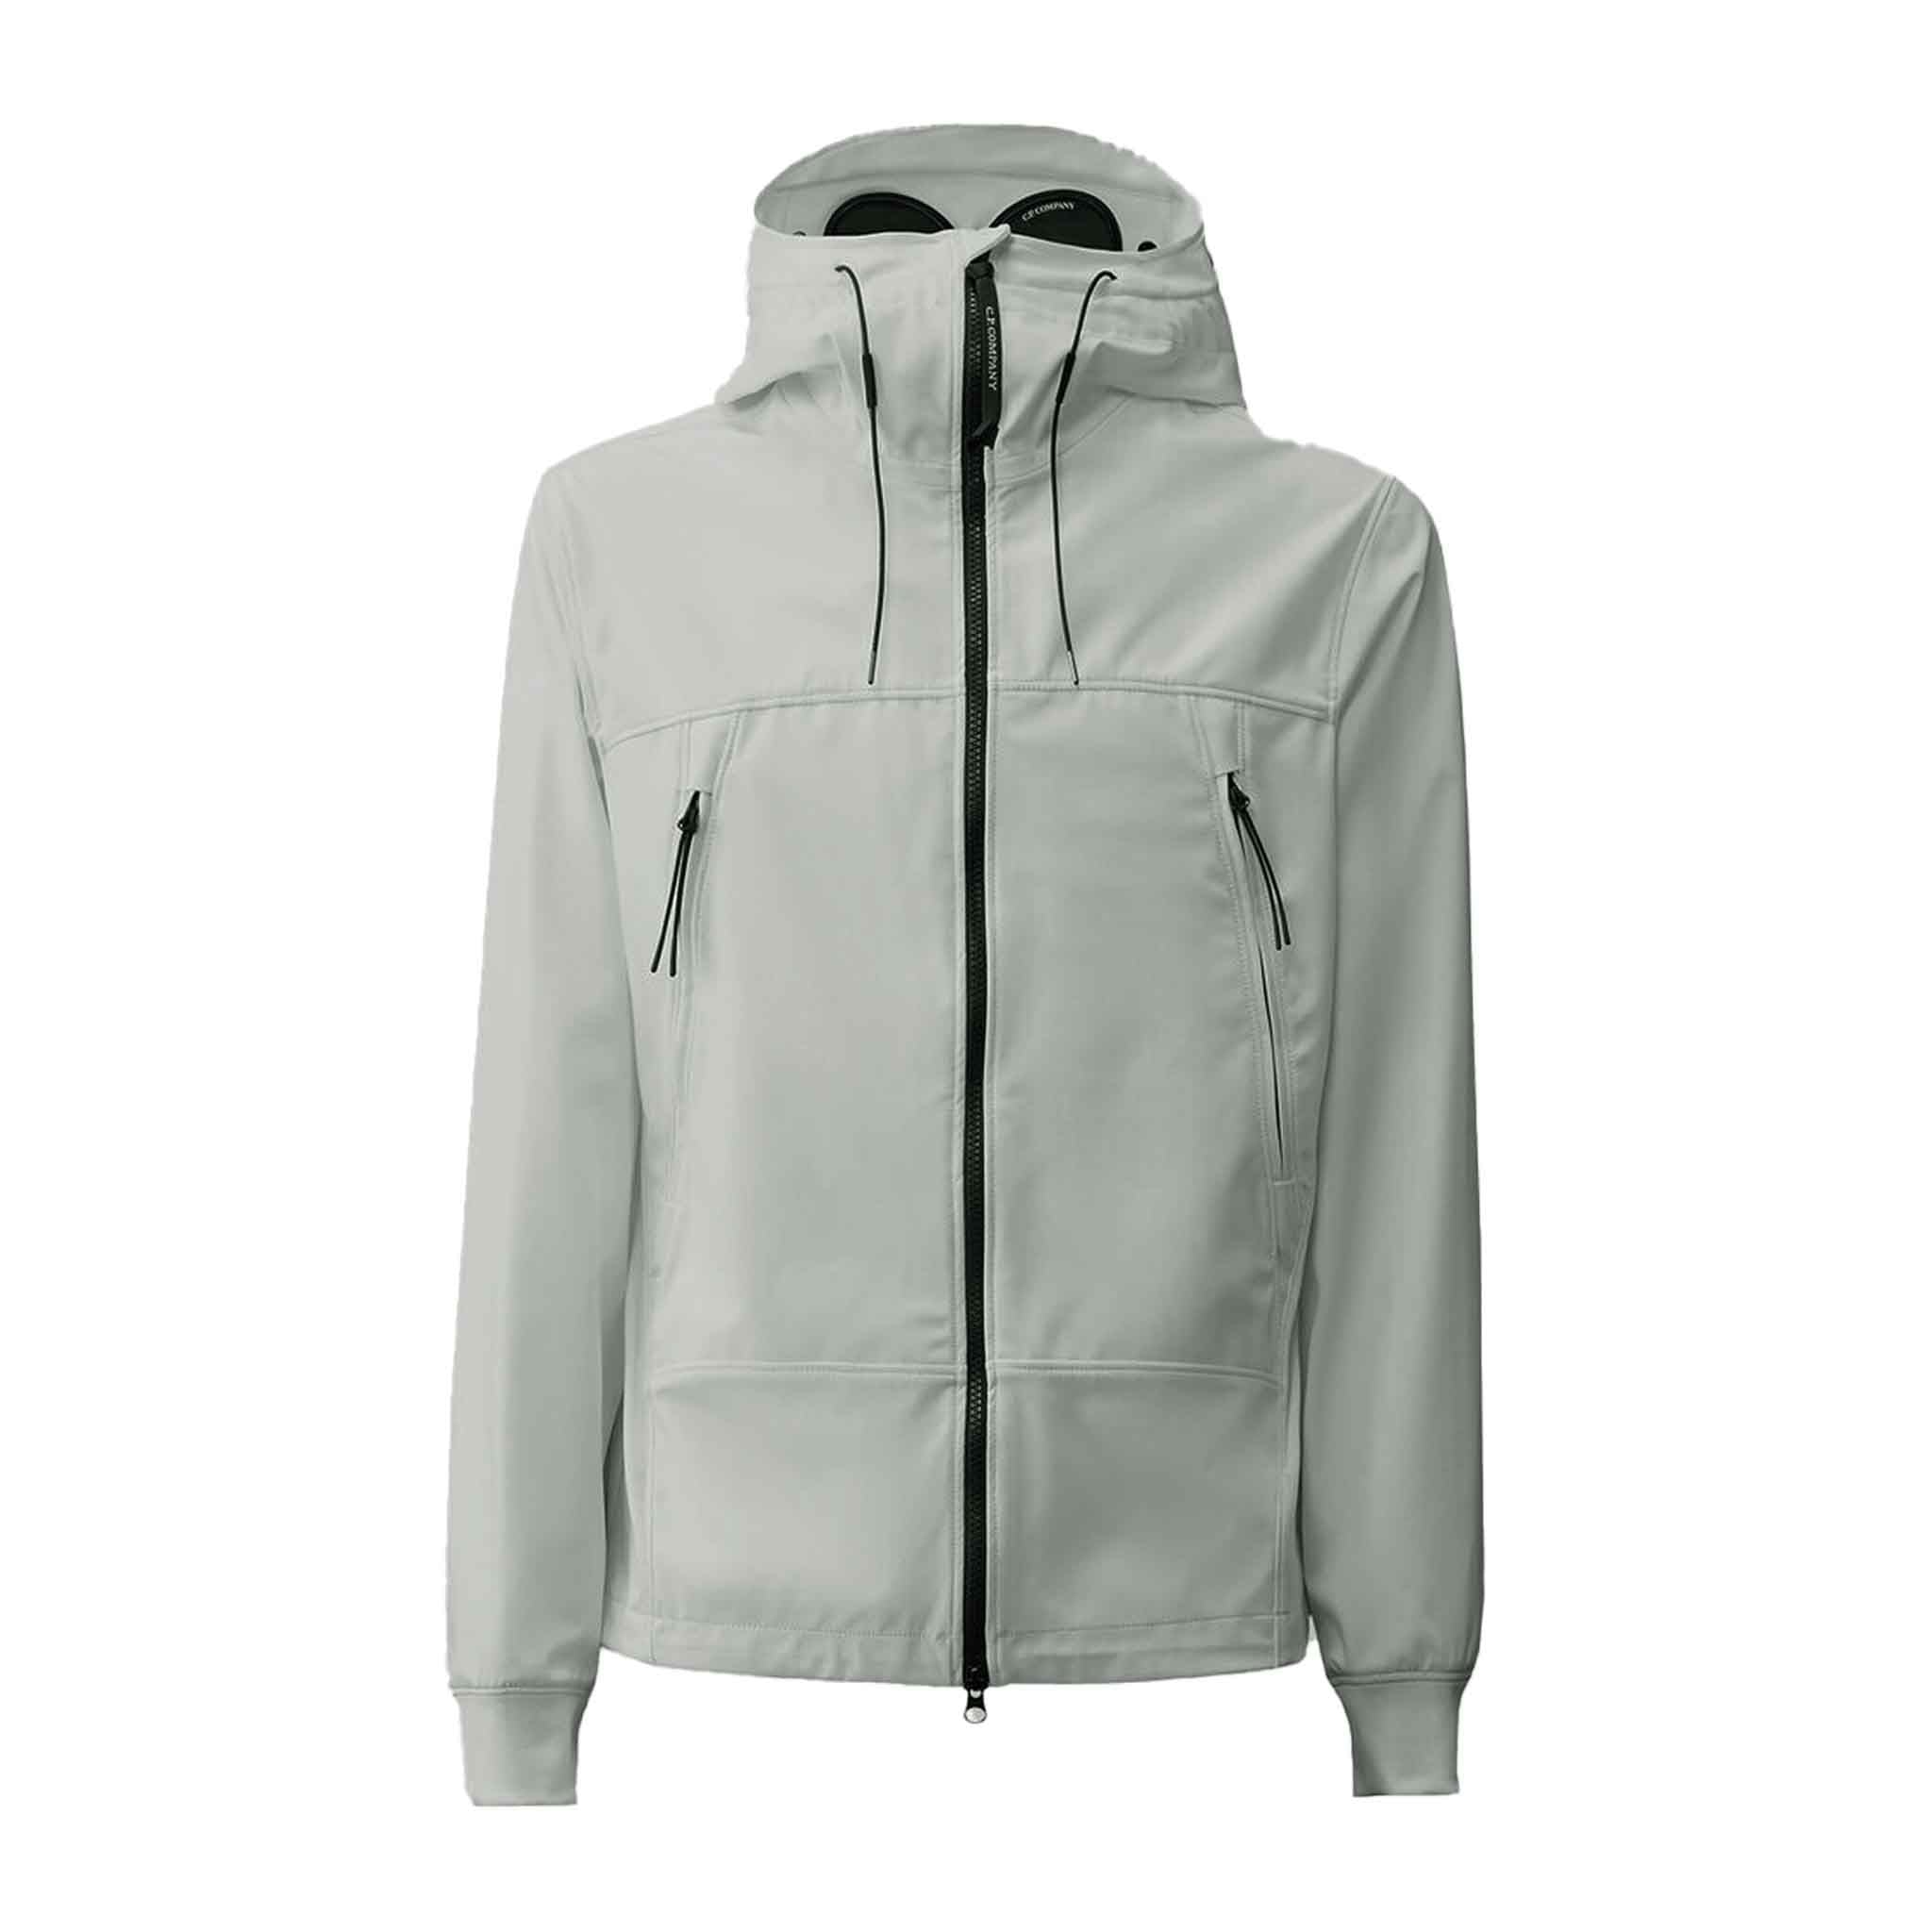 C.P. Company Shell-R Goggle Jacket in Drizzle Grey